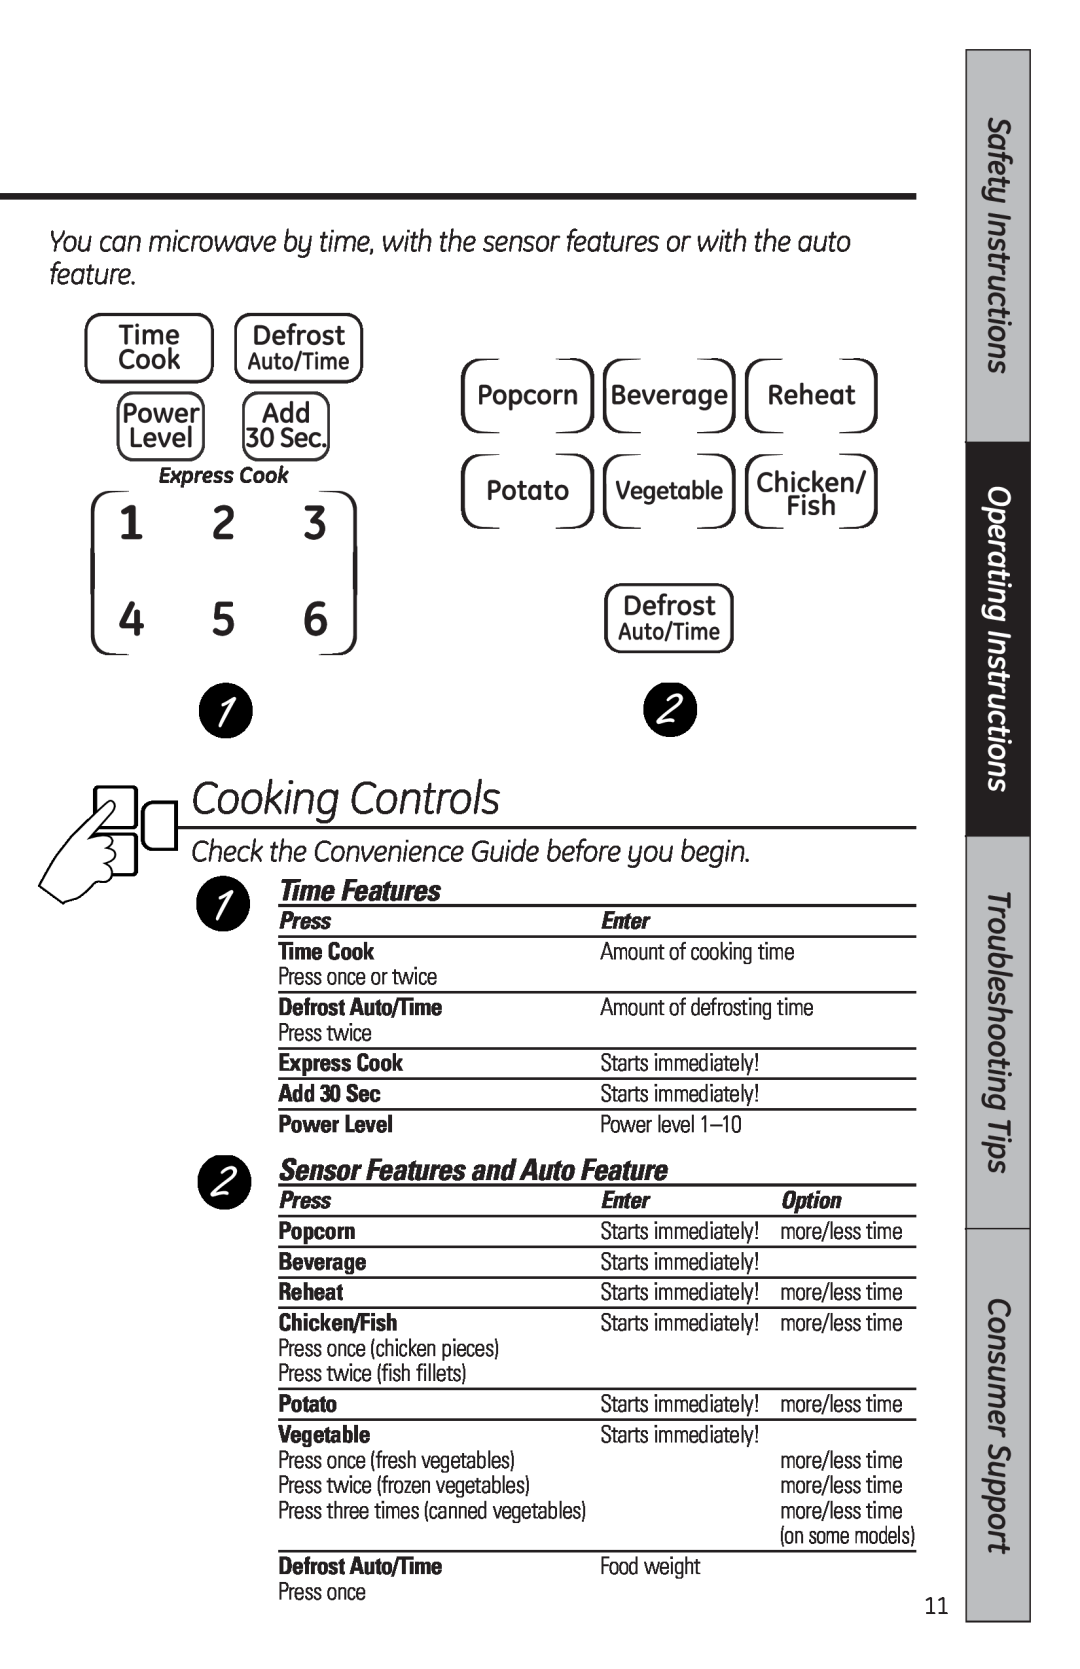 GE JES2051 Cooking Controls, Operating Instructions Troubleshooting Tips, Check the Convenience Guide before you begin 